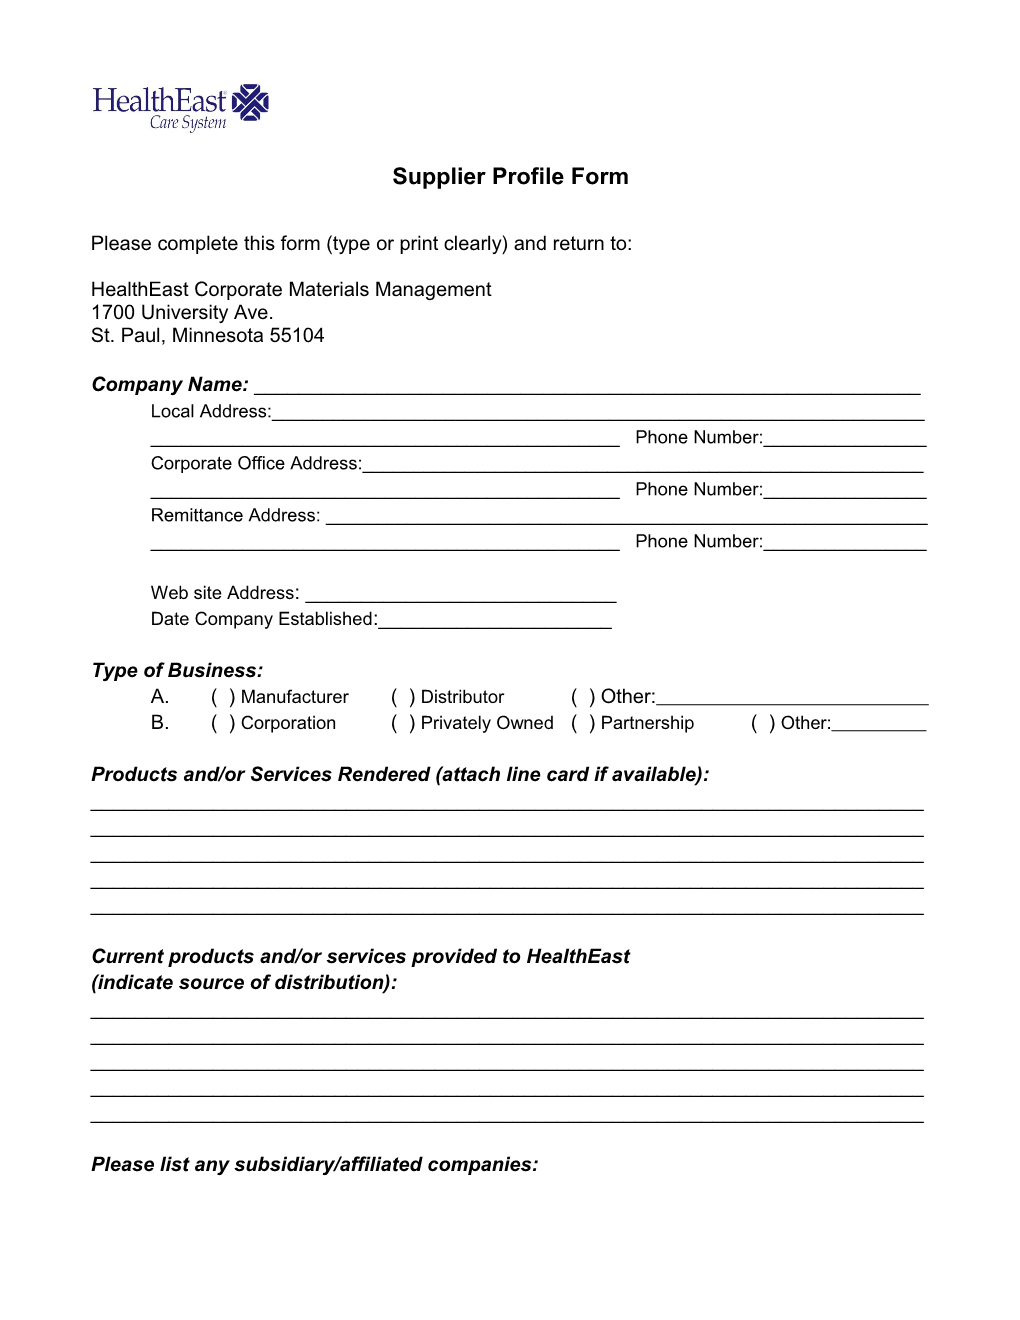 Please Complete This Form (Type Or Print Clearly) and Return To